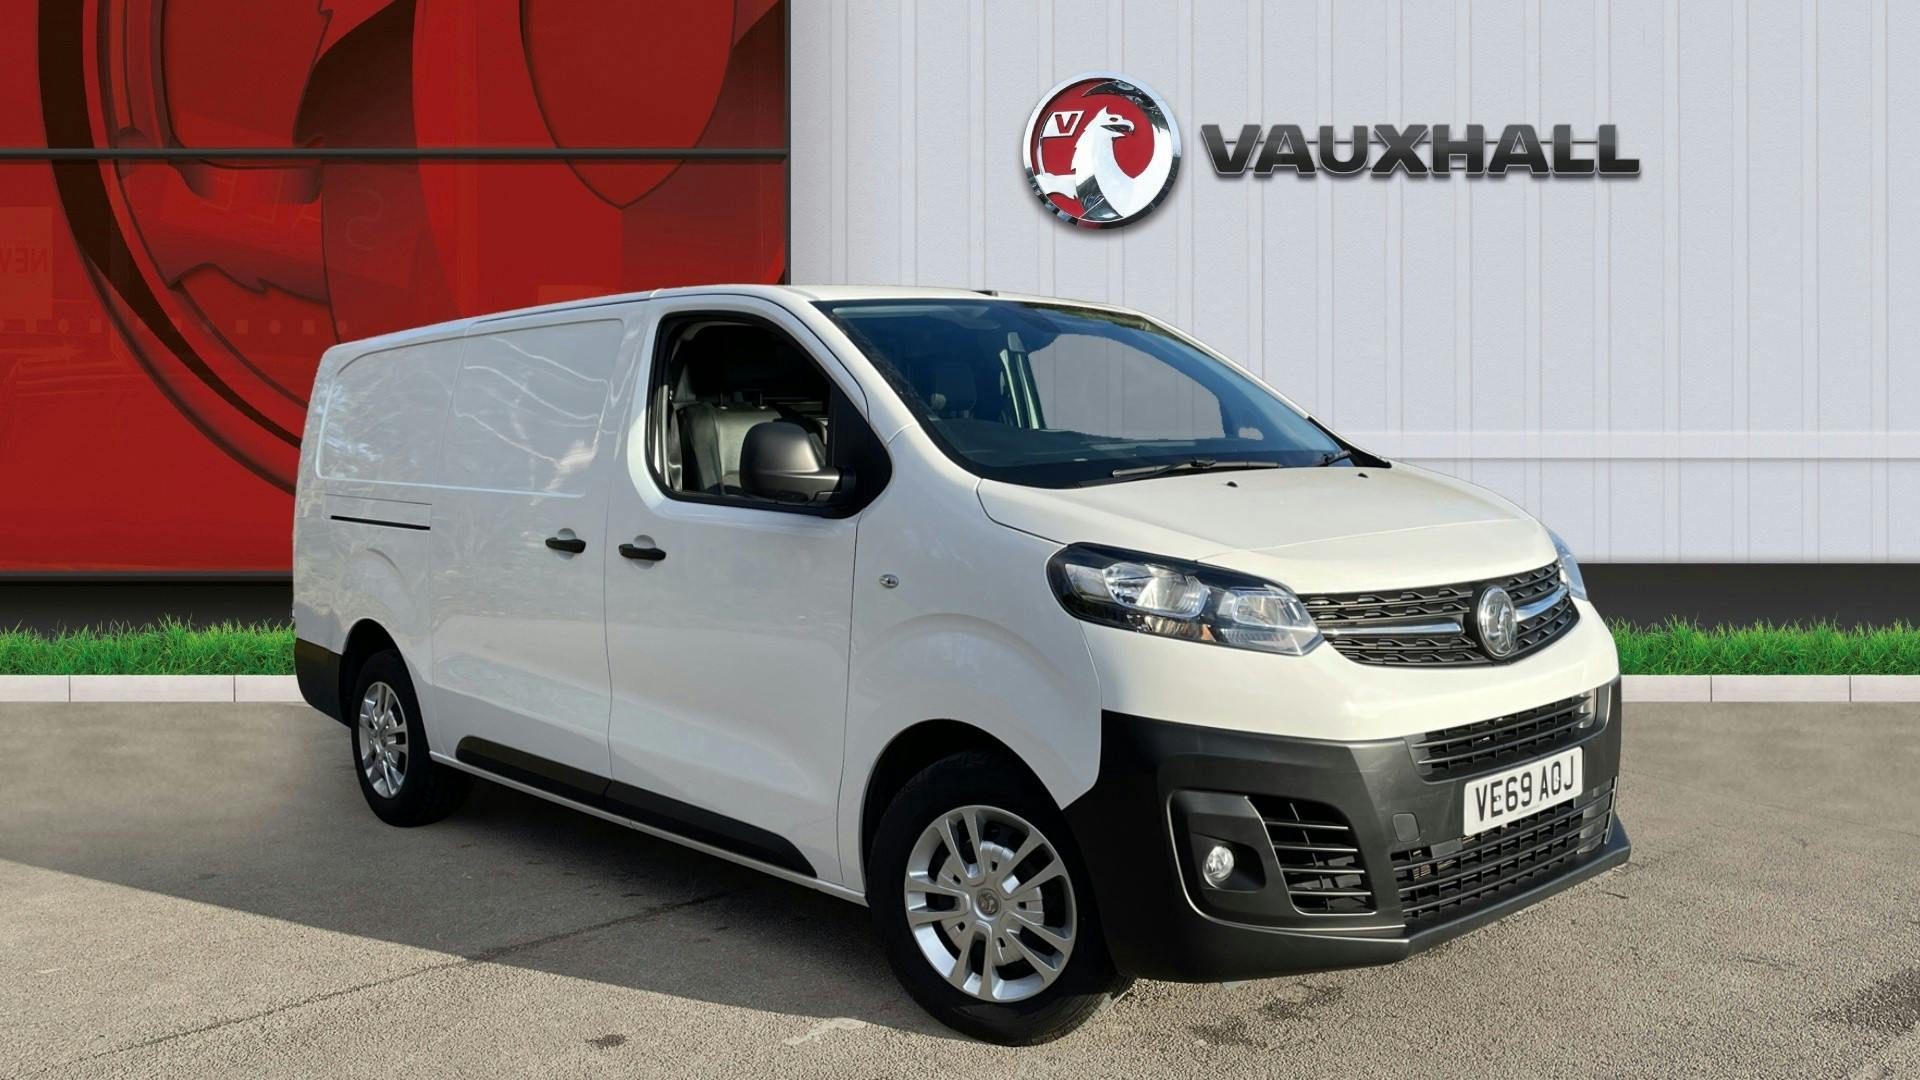 Used Vauxhall Vans For Sale | Nearly 